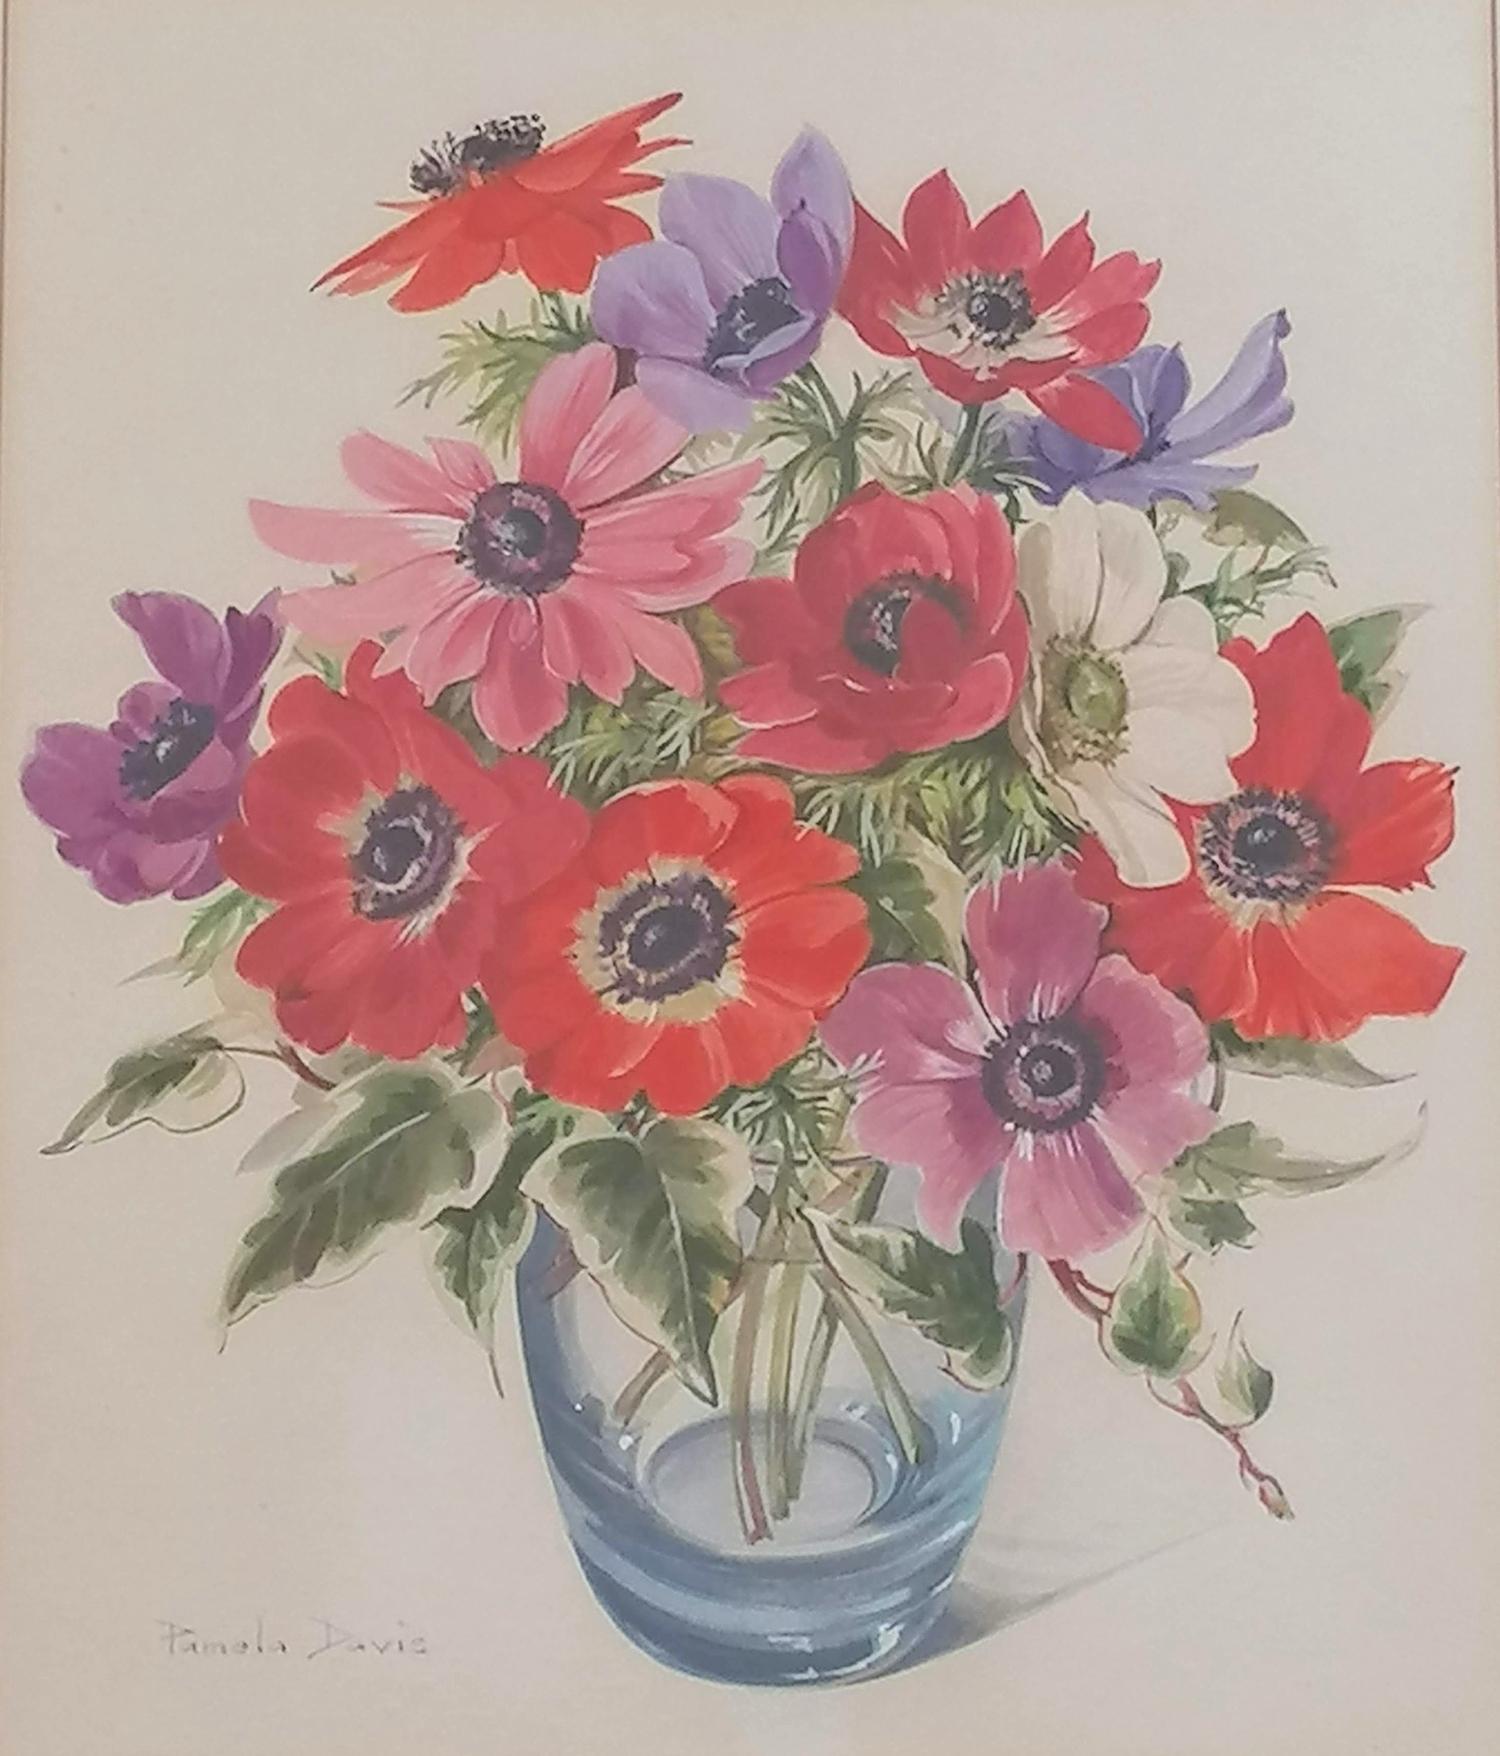 Pamela Davies, STILL LIFE OF FLOWERS, watercolour, framed and mounted, signed, 32 x 26 cm